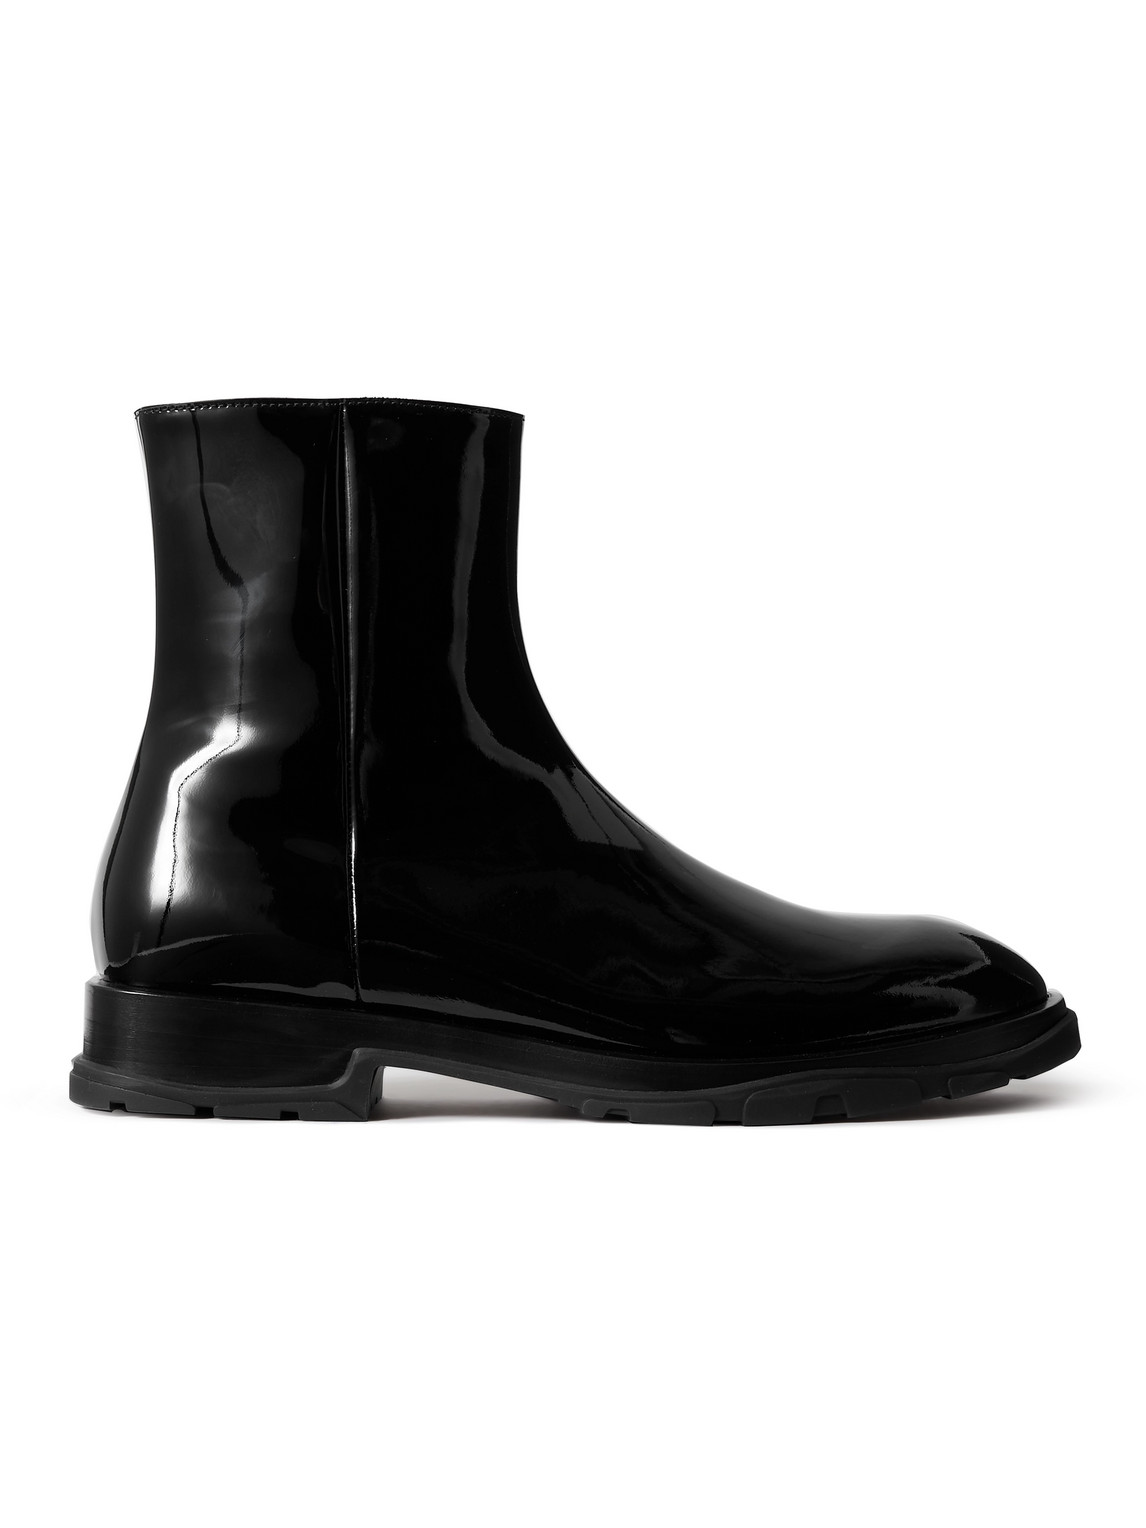 ALEXANDER MCQUEEN PATENT-LEATHER ANKLE BOOTS